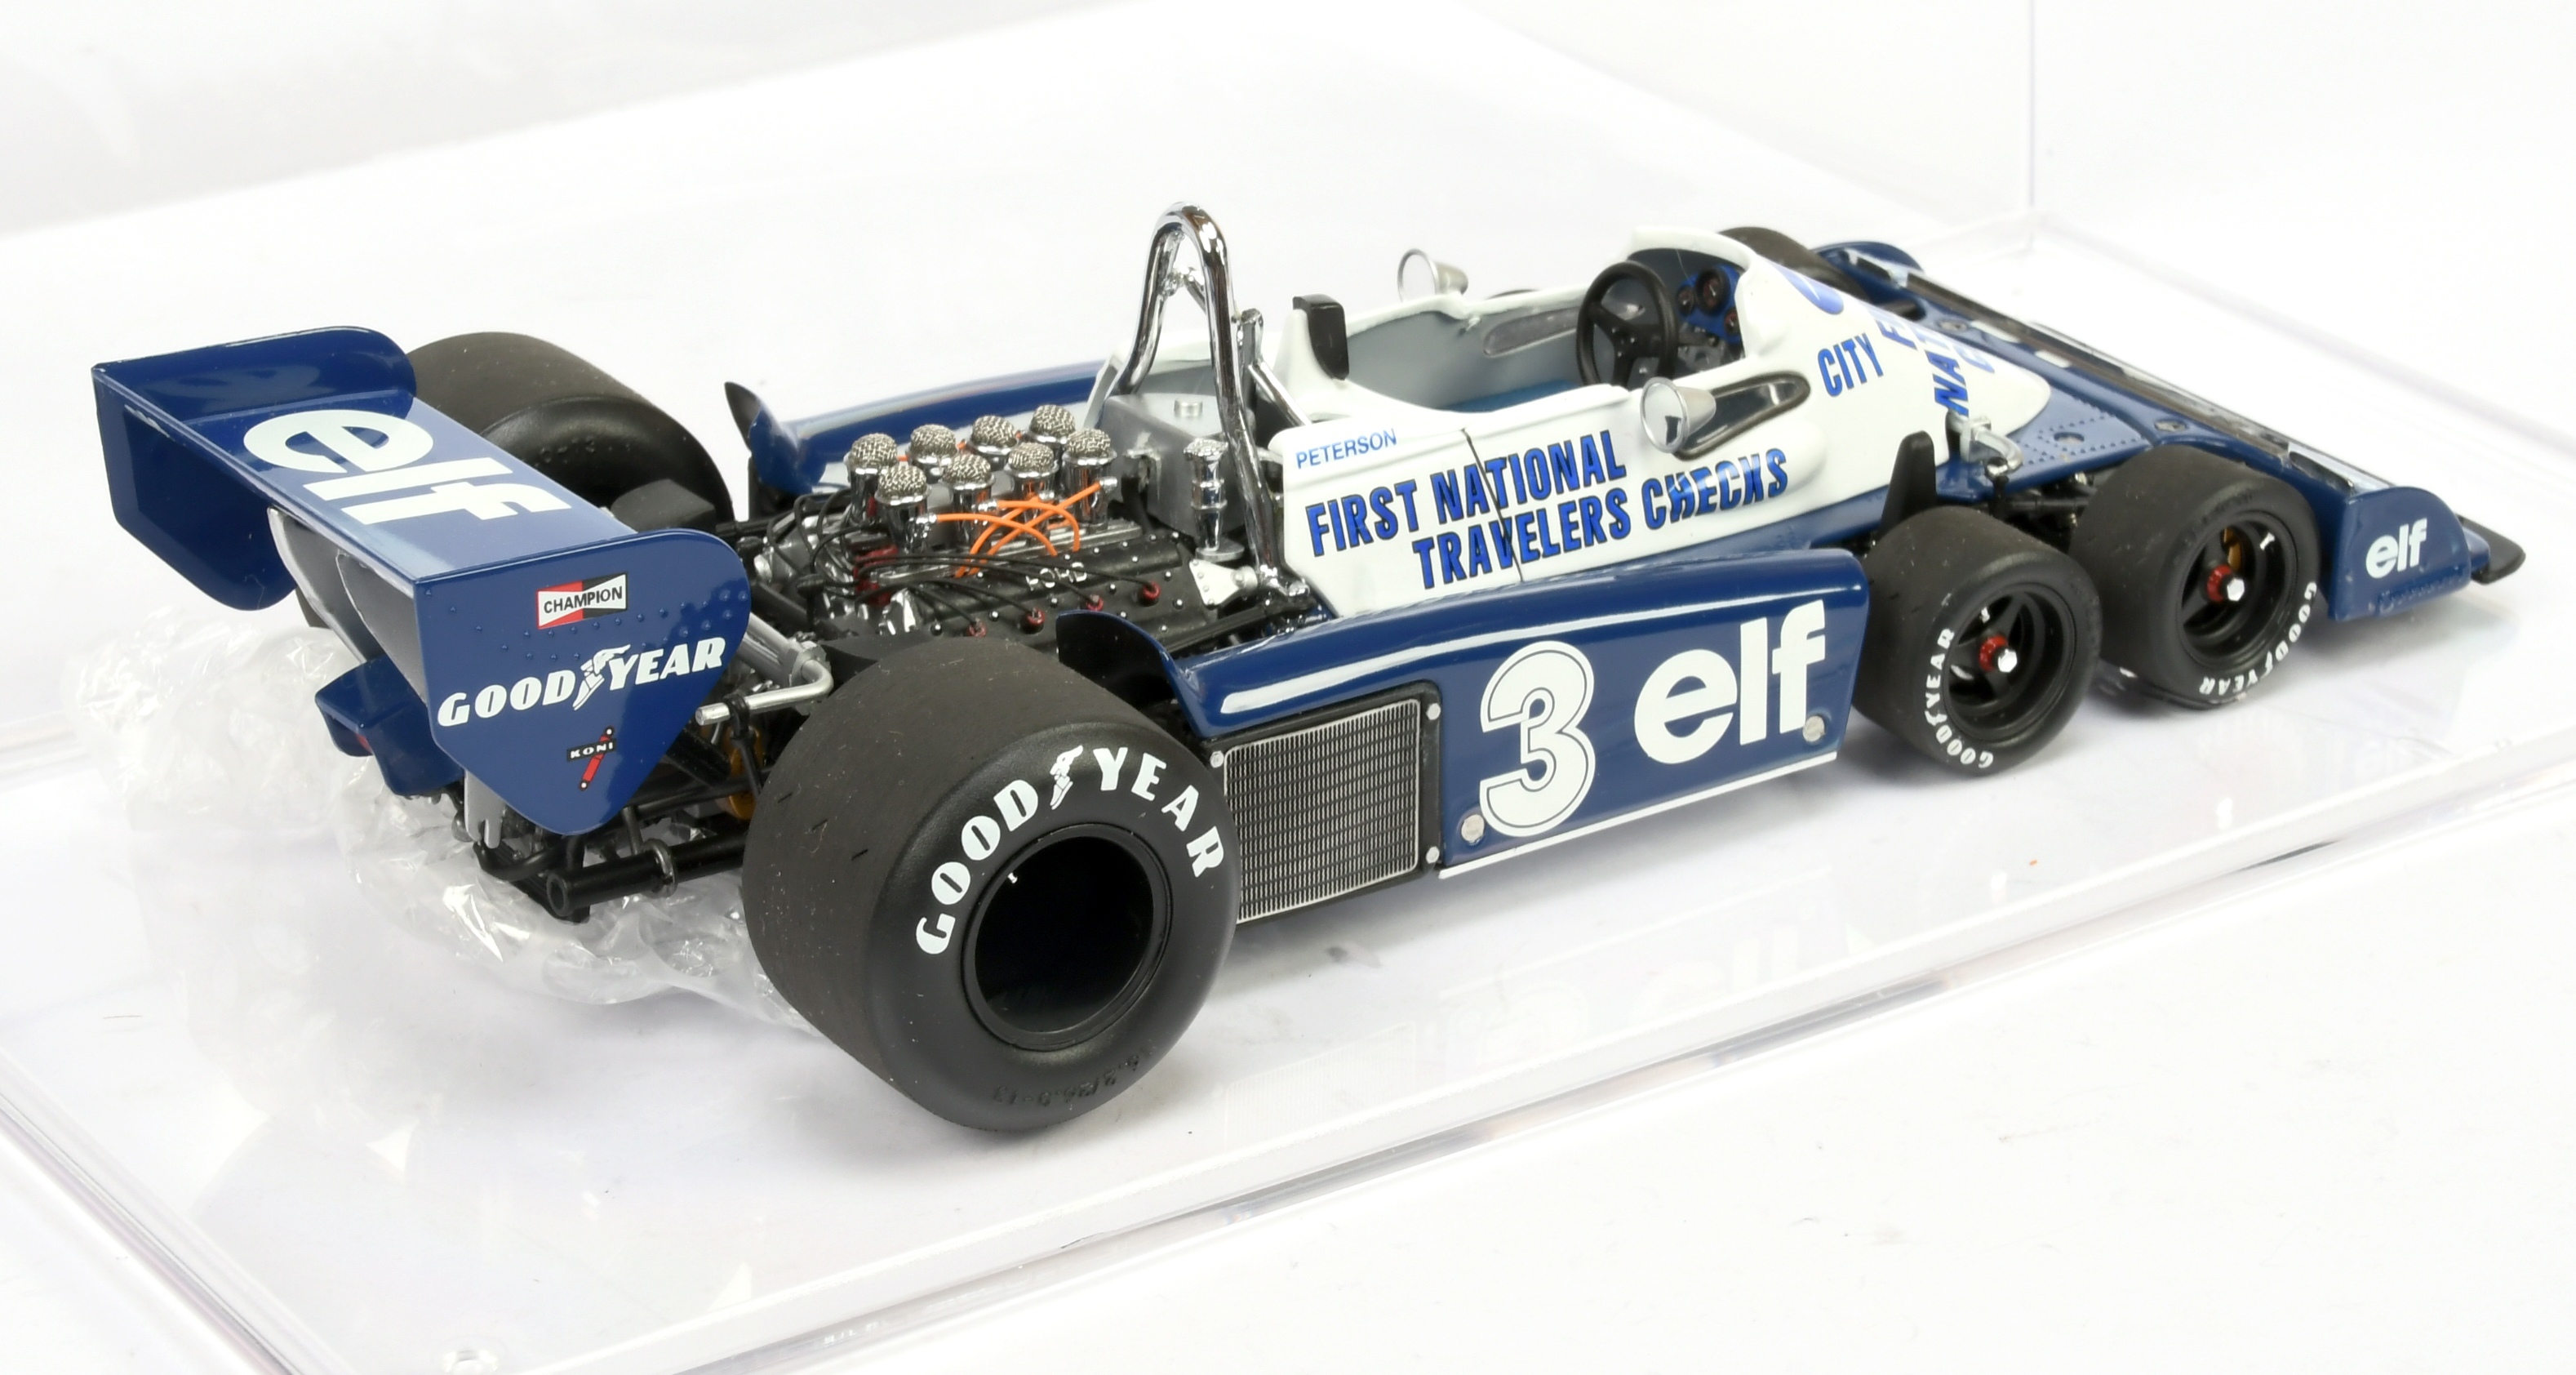 Exoto 1/18 scale models Grand Prix Tyrrell Ford P34 1997 Exoto inc  - Image 2 of 2